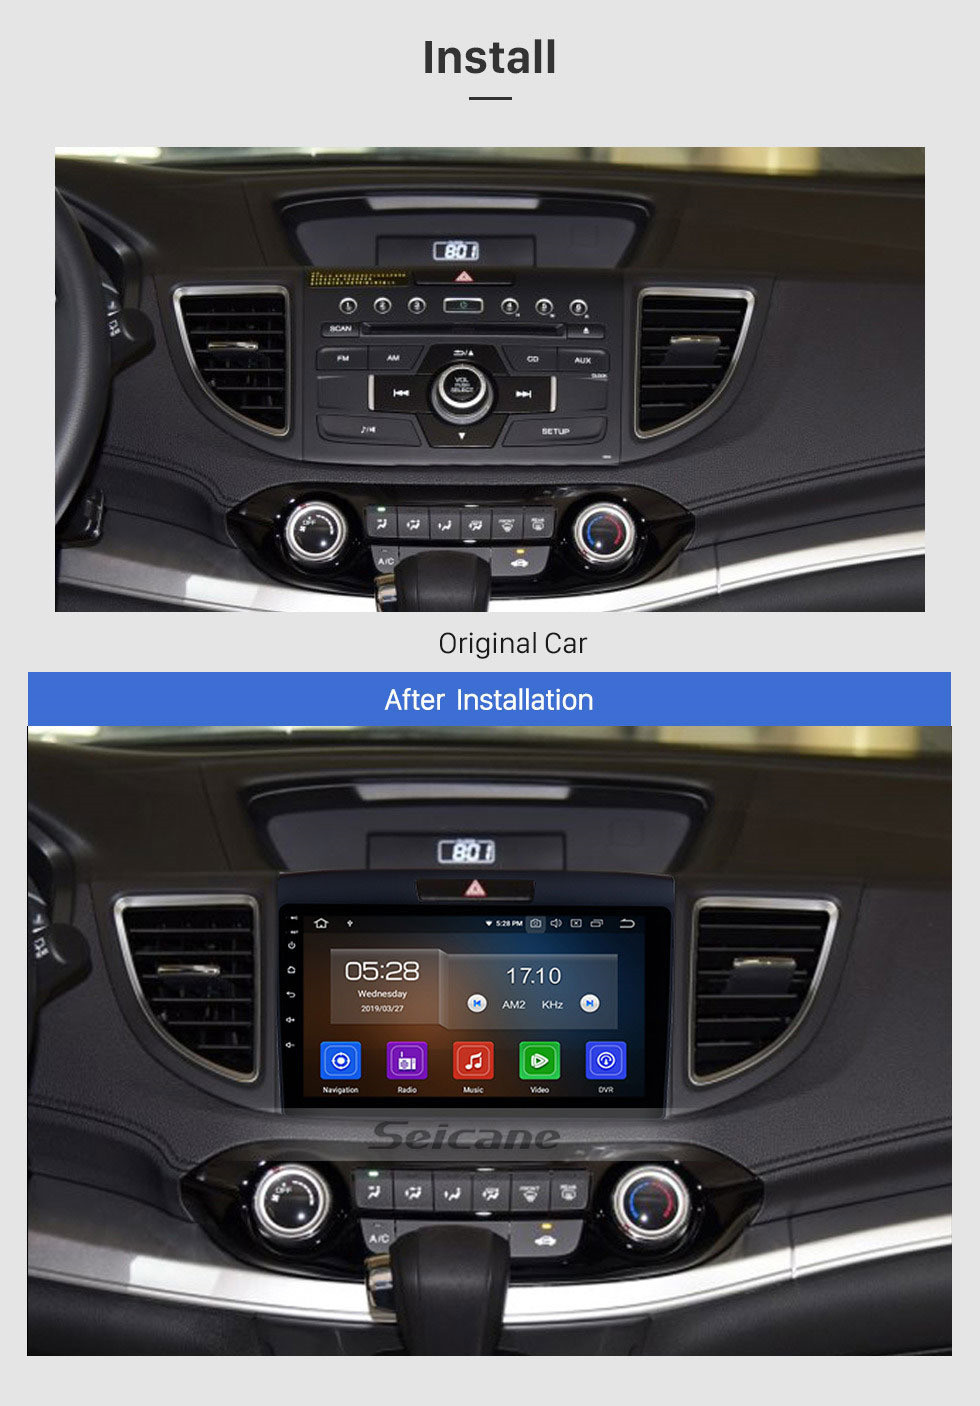 Seicane All in one 2011 2012 2013 2014 2015 Honda CRV Android 13.0 CD DVD Radio GPS Navigation system Bluetooth Music Audio USB WIFI Support Aux TPMS DVR 1080P Video Steering Wheel Control